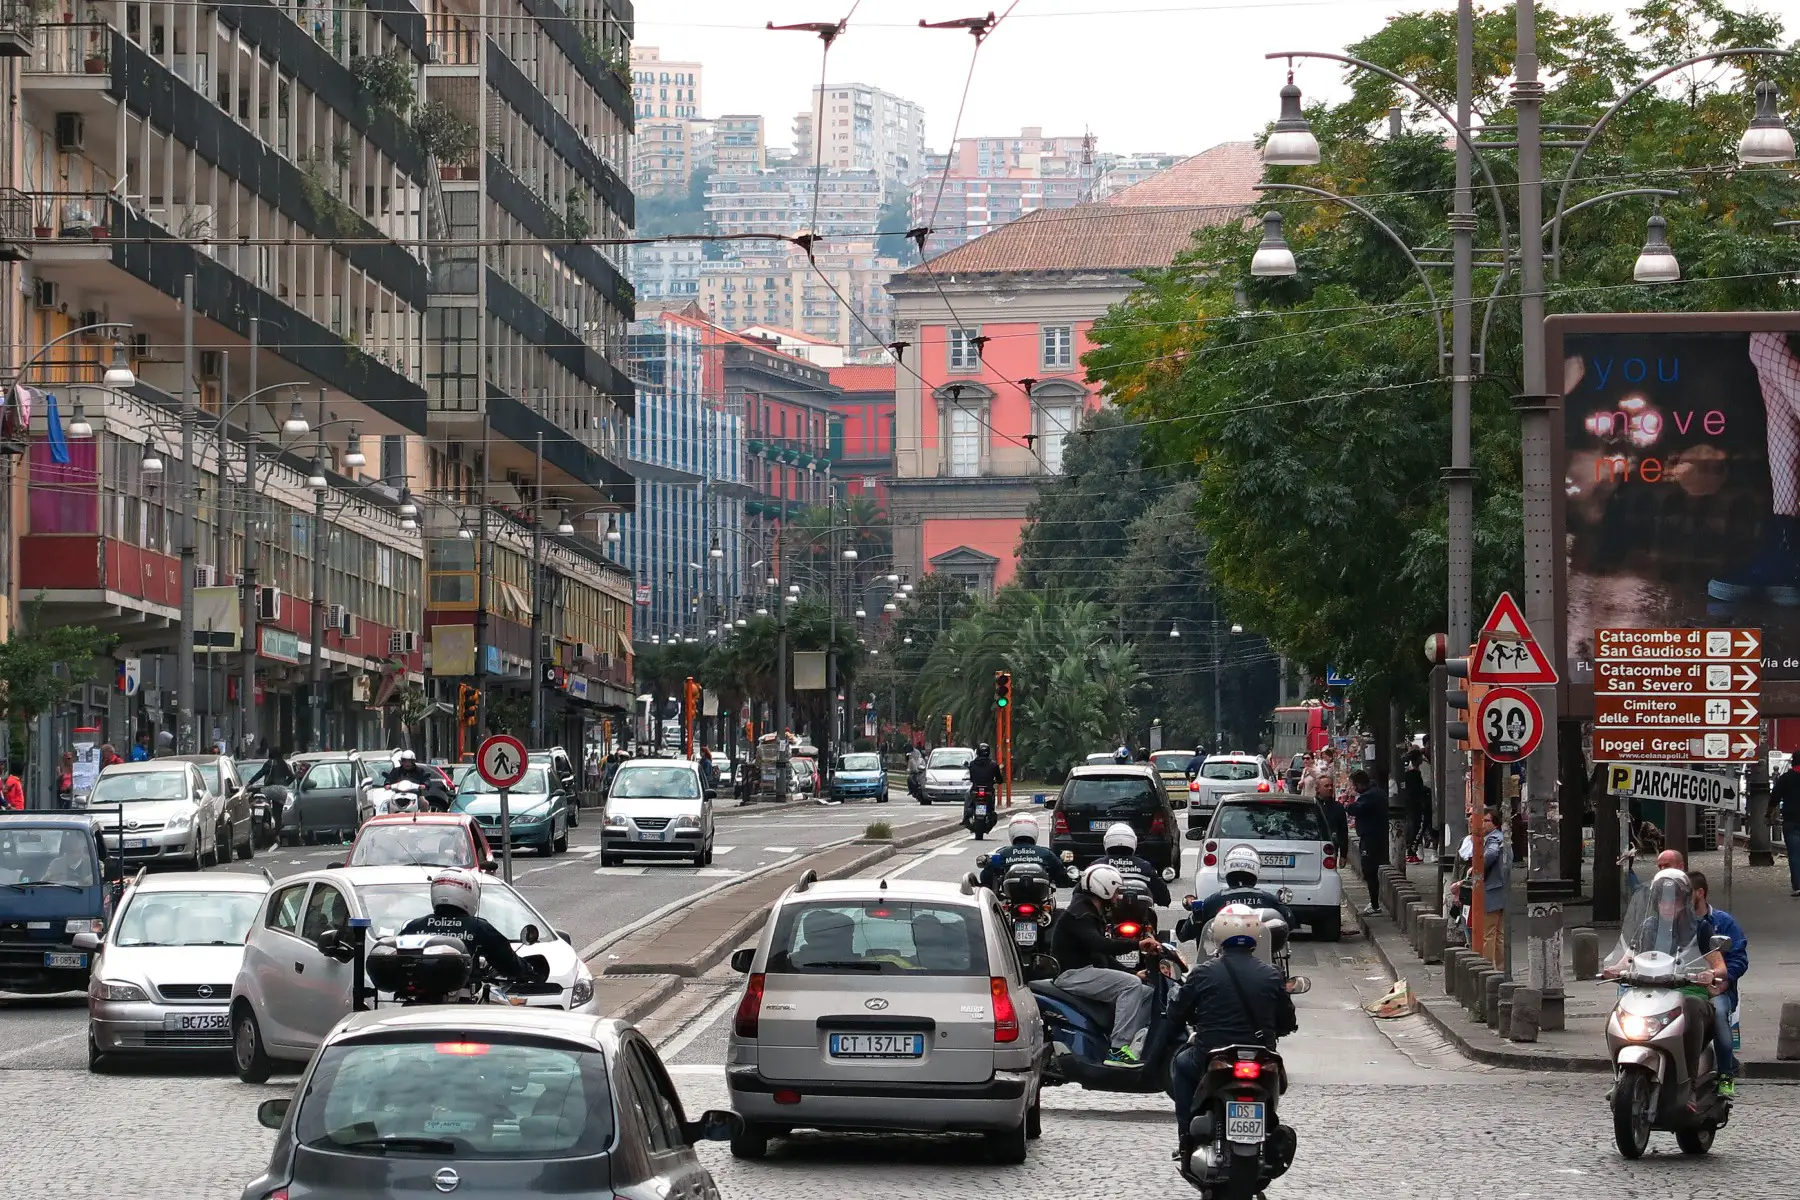 Busy intersection in Naples, Italy